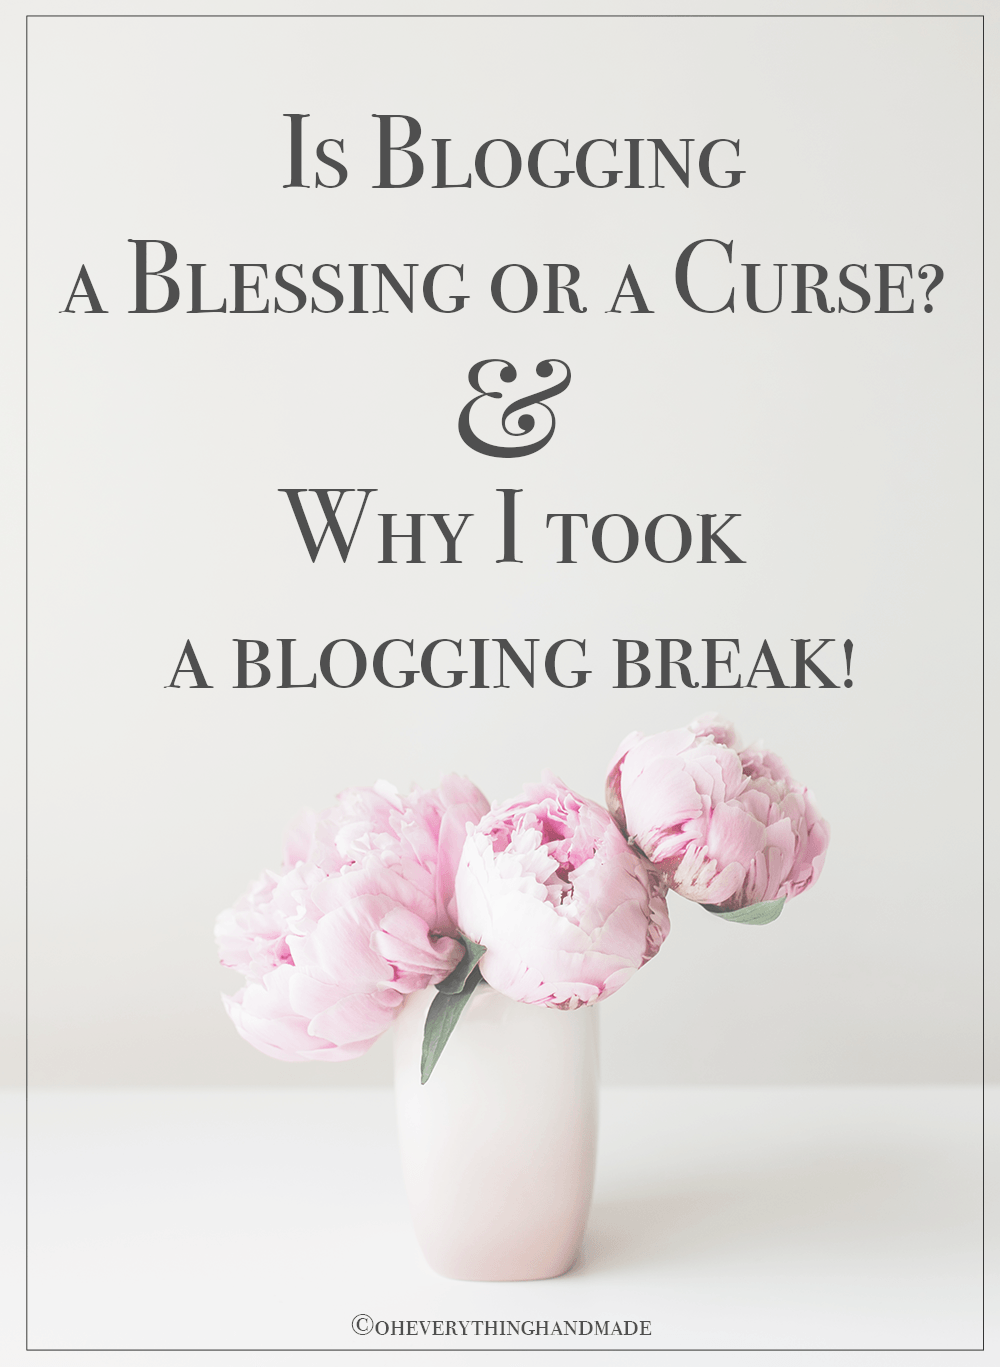 Is Blogging a Blessing or a Curse?